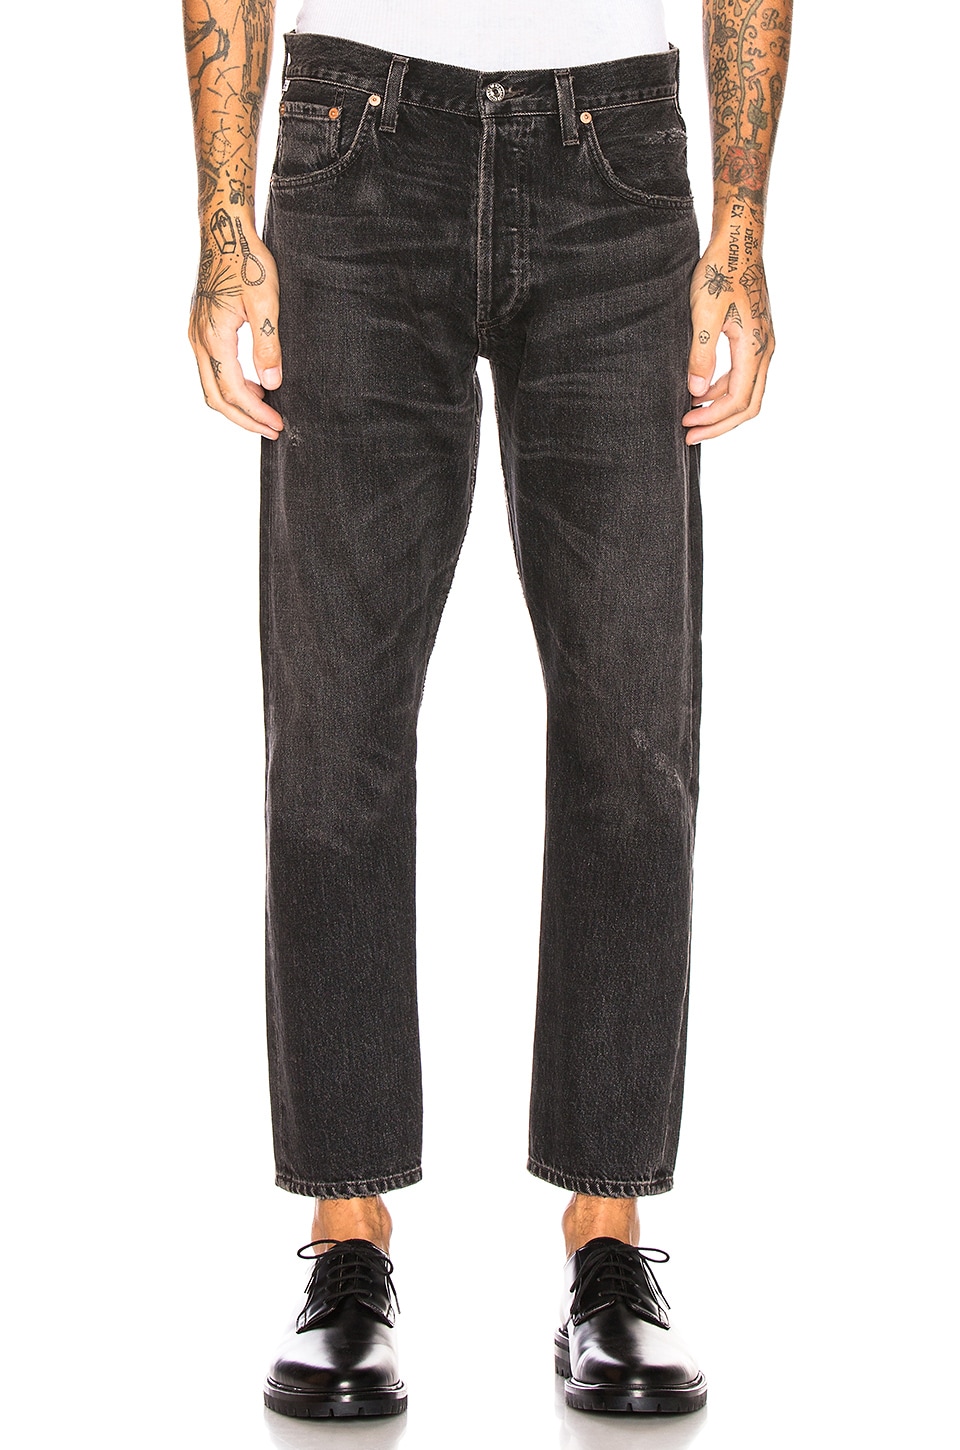 Citizens Of Humanity Rowan Crop Relaxed Slim Fit In Black Ash Revolve